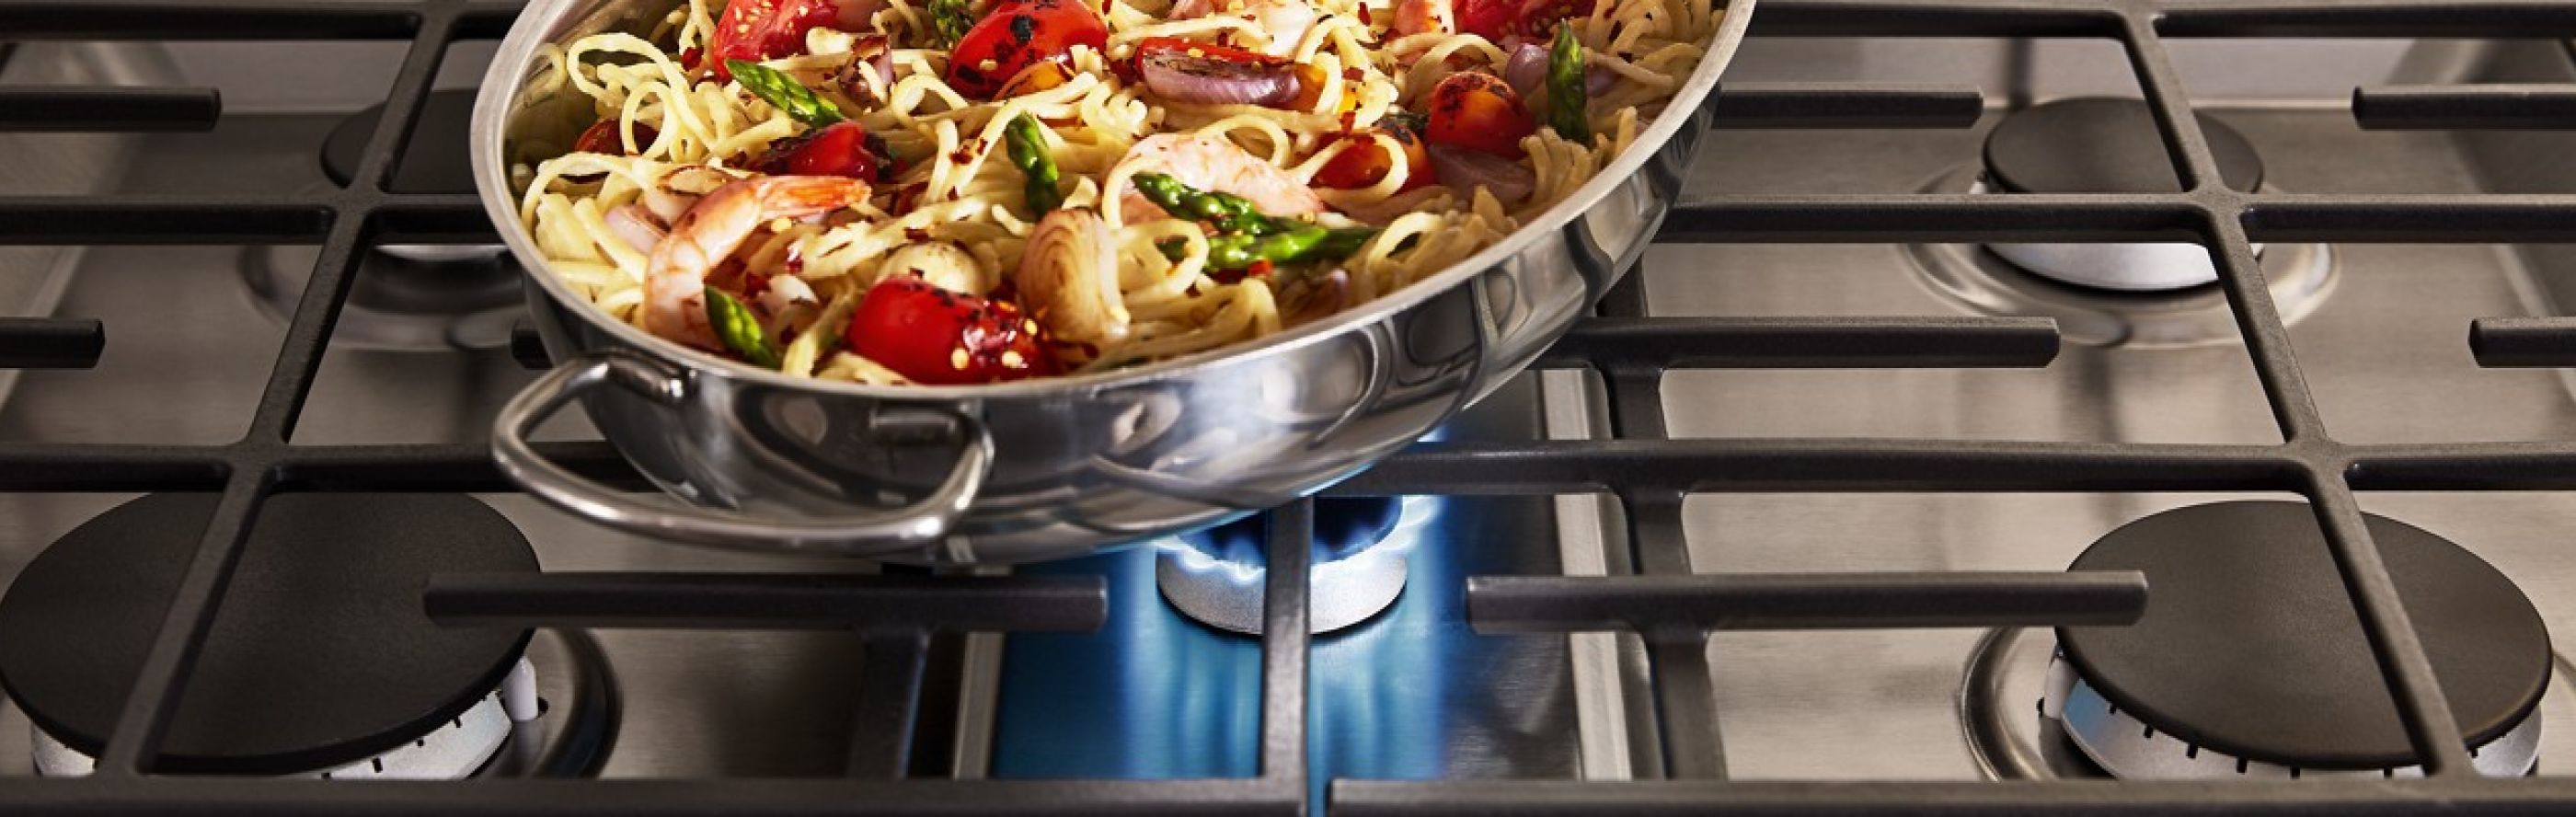 Pasta in a pan on a gas stove burner